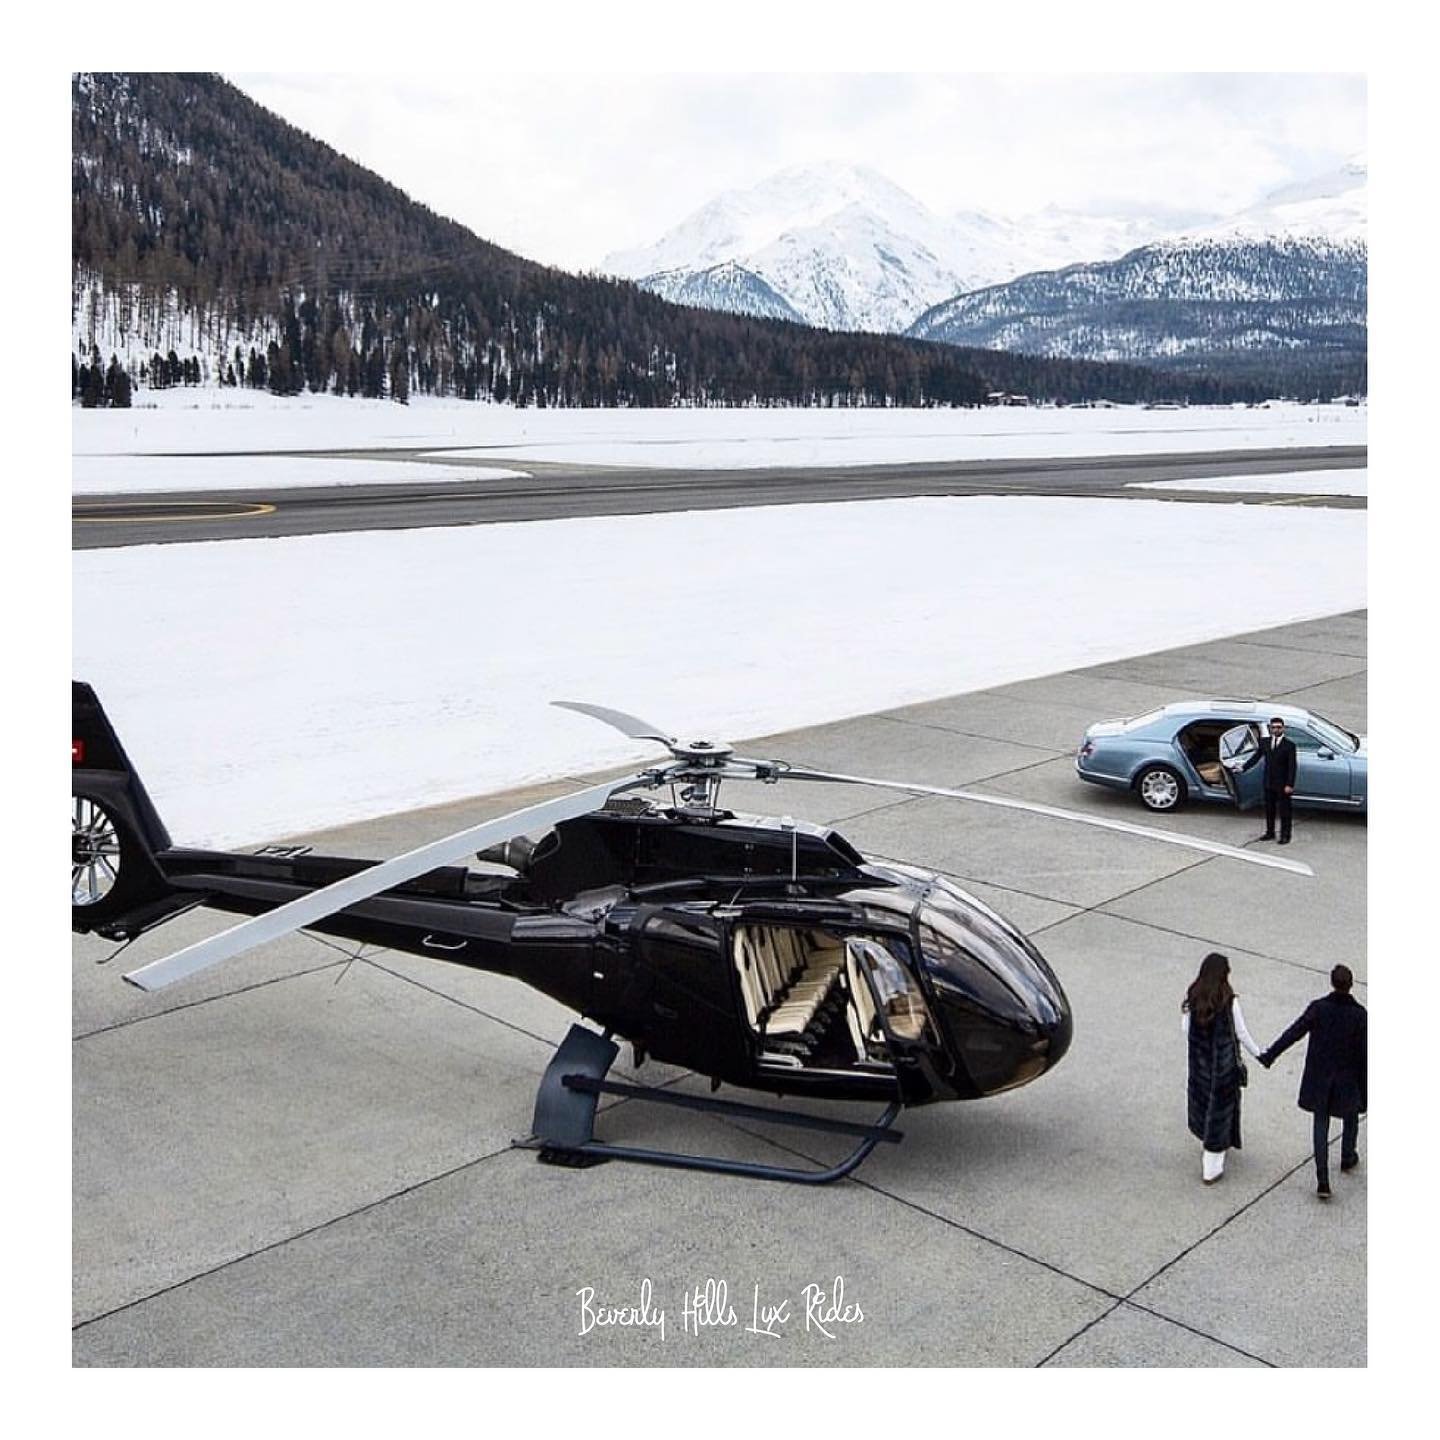 Our most-recommended helicopter tour that takes you on an unforgettable adventure above famous beaches, cities, celebrity homes, malibu and much more! You can also customize your own flight for vacations to Big Bear, Mammoth and Coachella